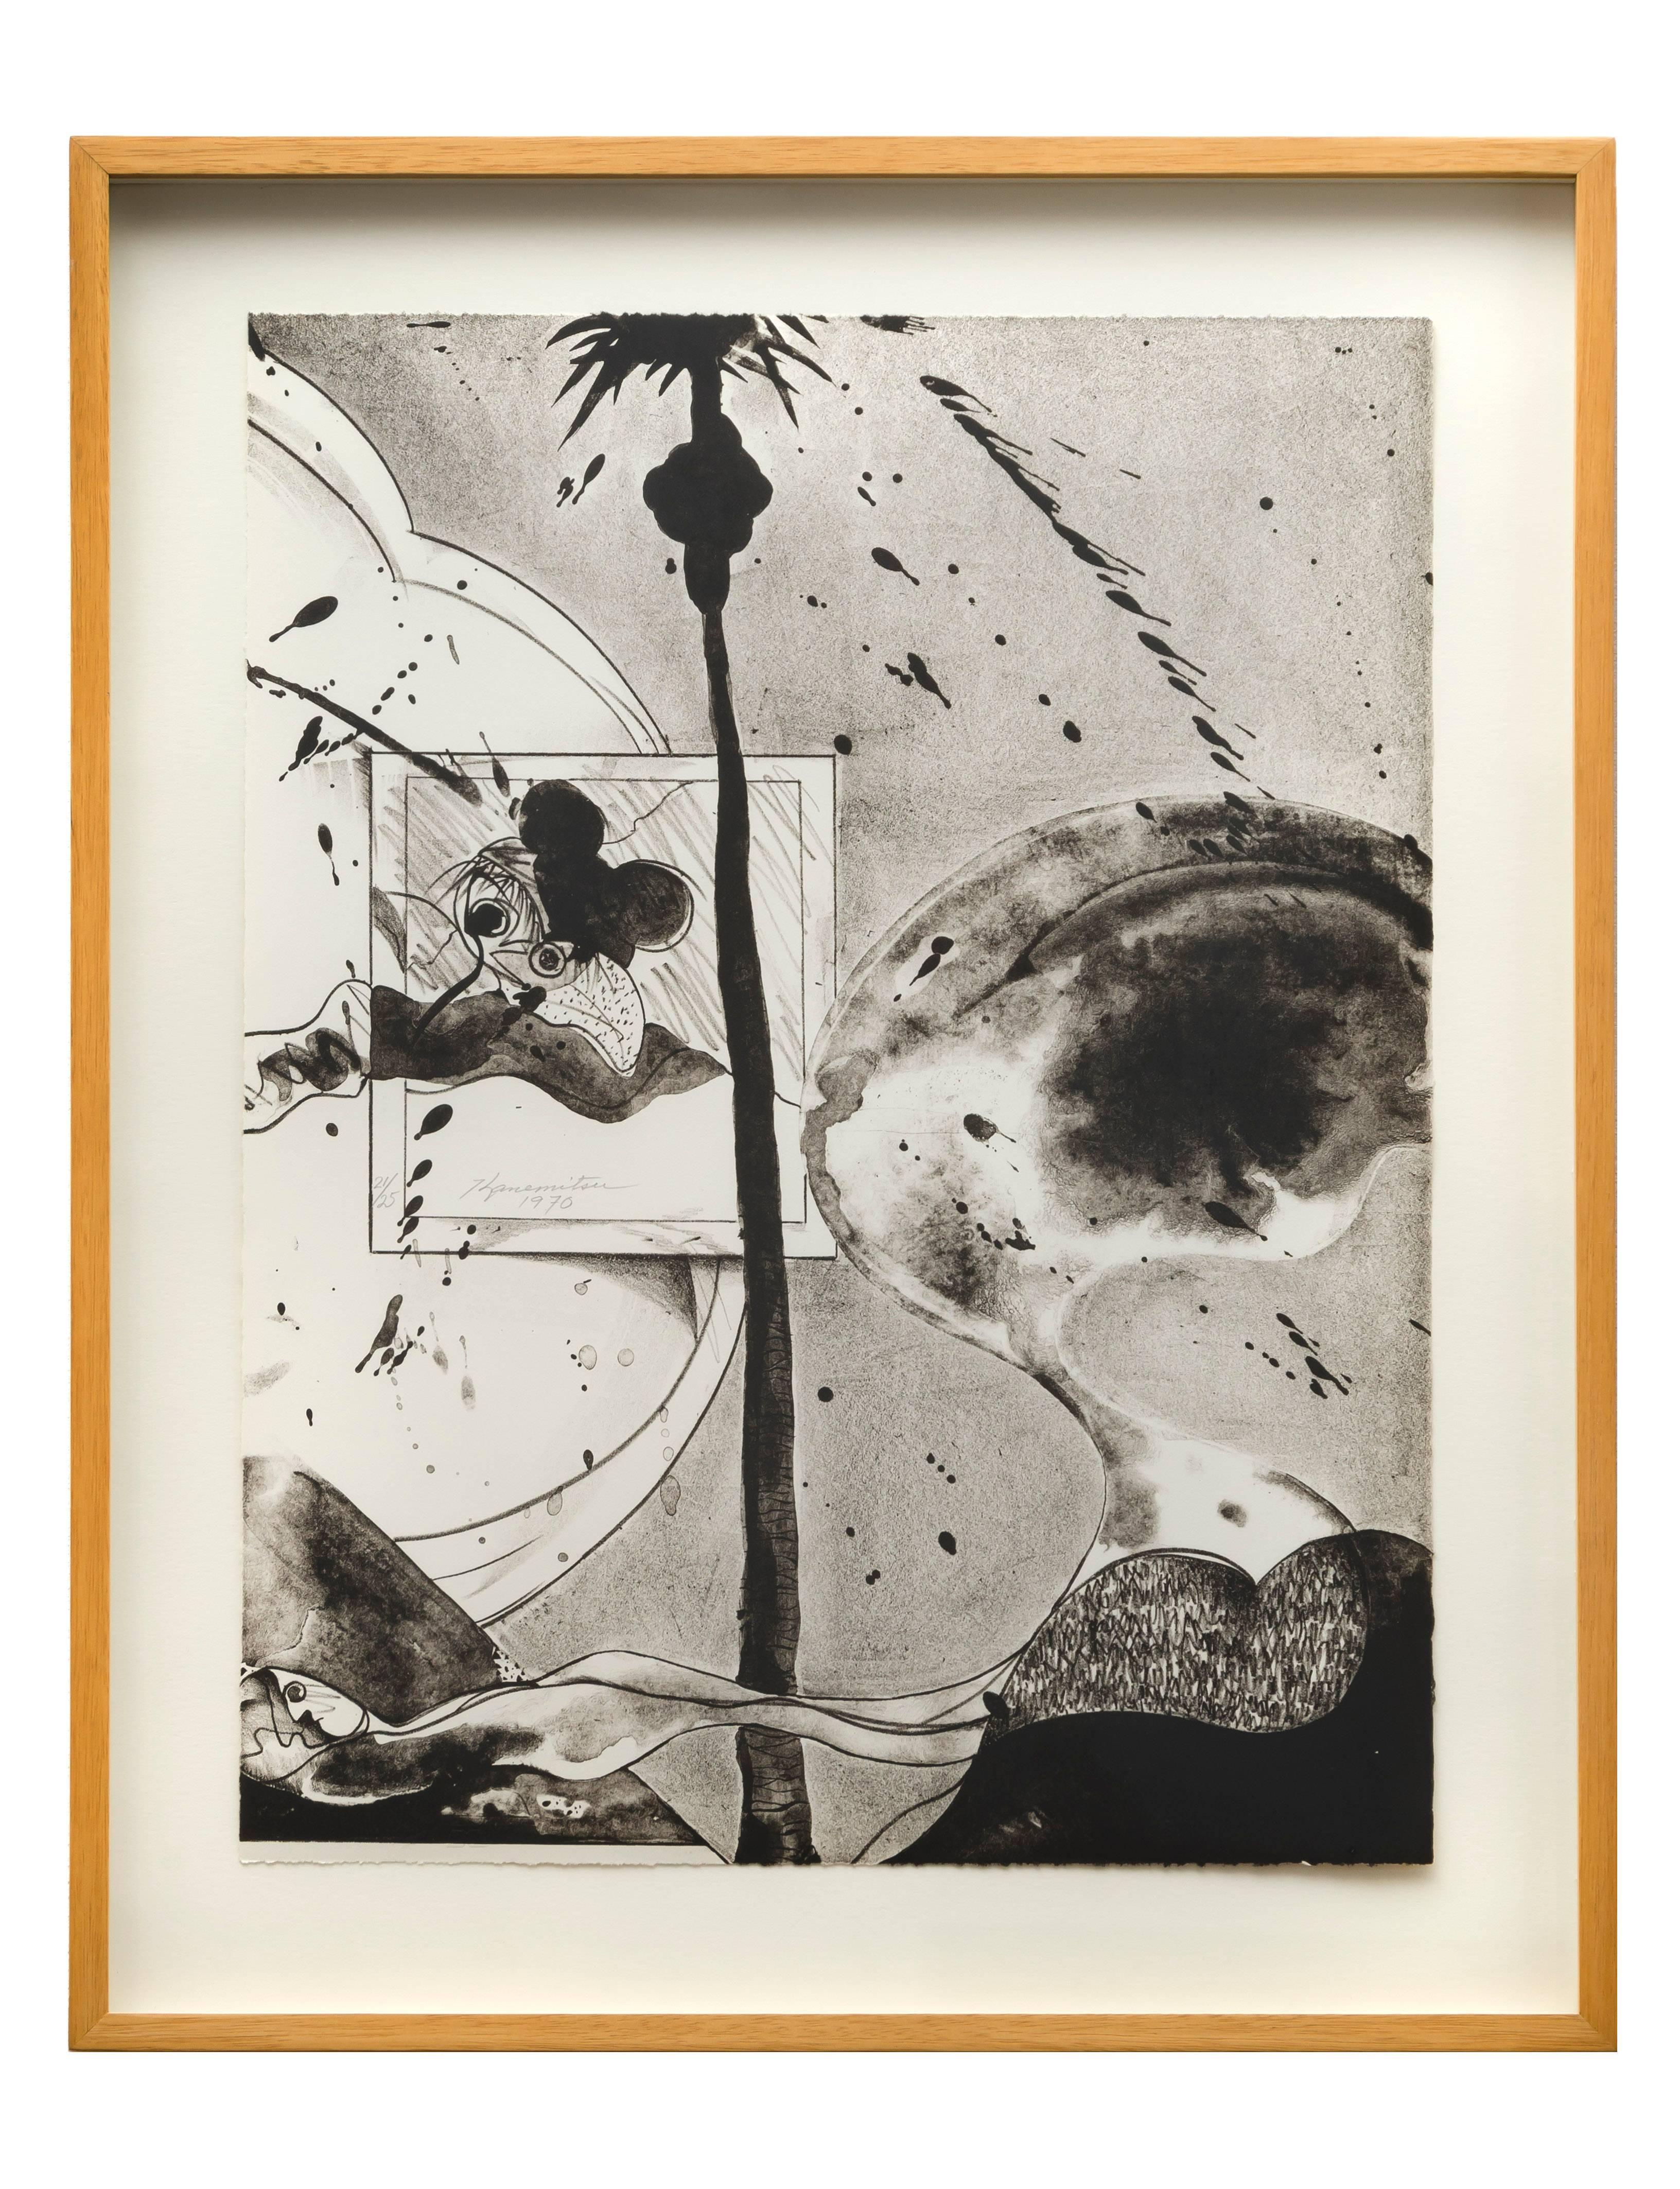 Matsumi Kanemitsu Abstract Print - Hollywood Hills Ghost, lithograph of scene in Hollywood Hills, palm tree, ghost